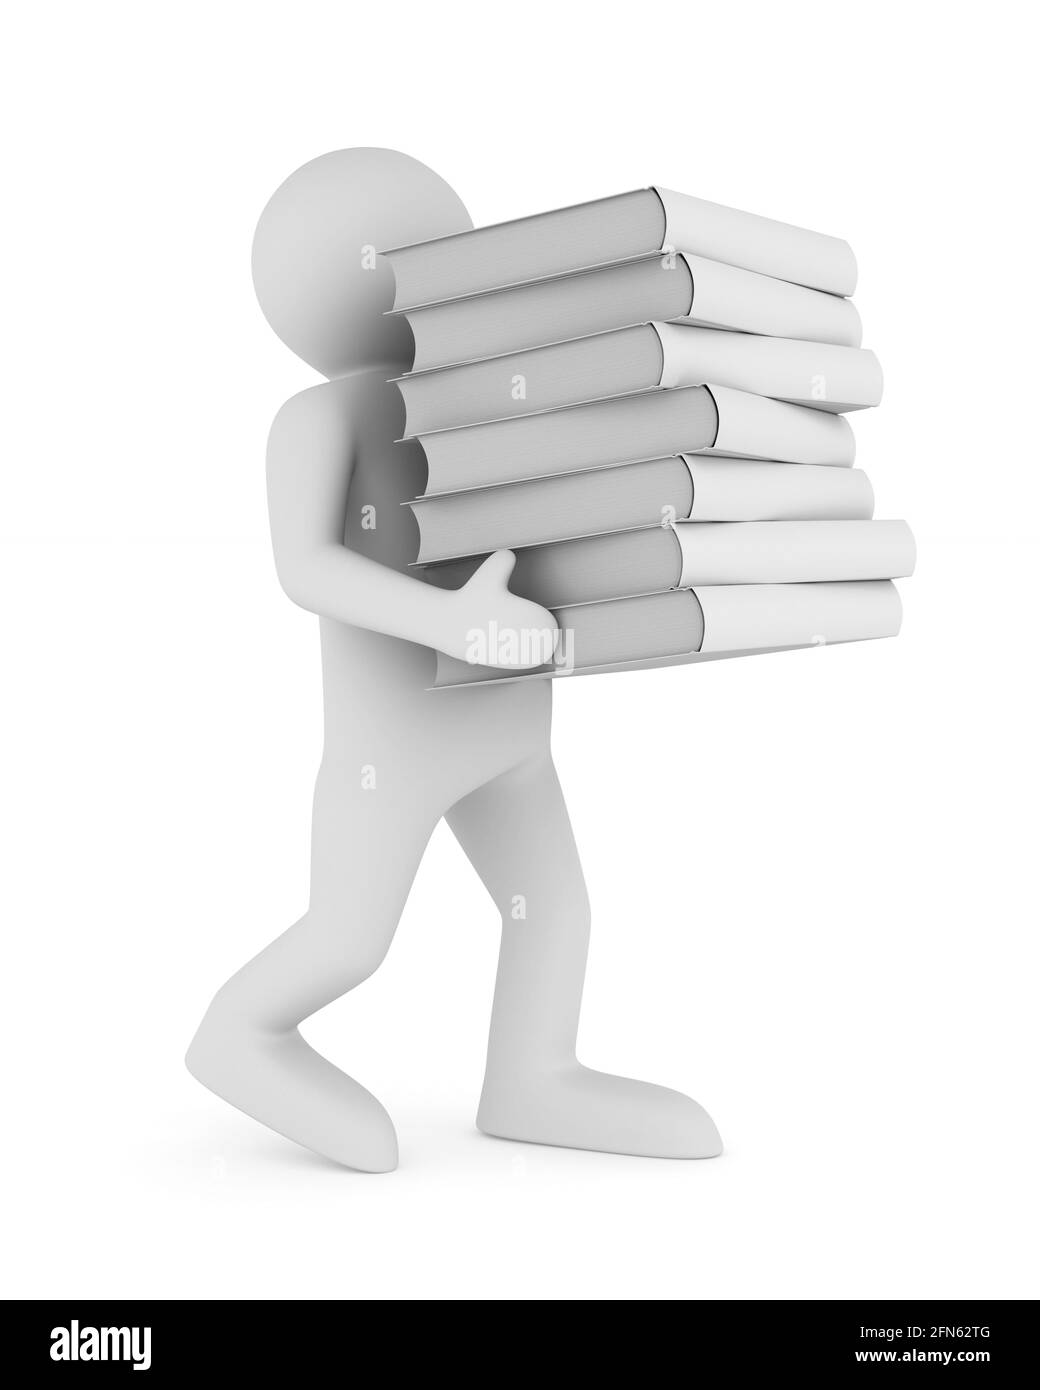 man carry pile books on white background. Isolated 3D illustration Stock Photo